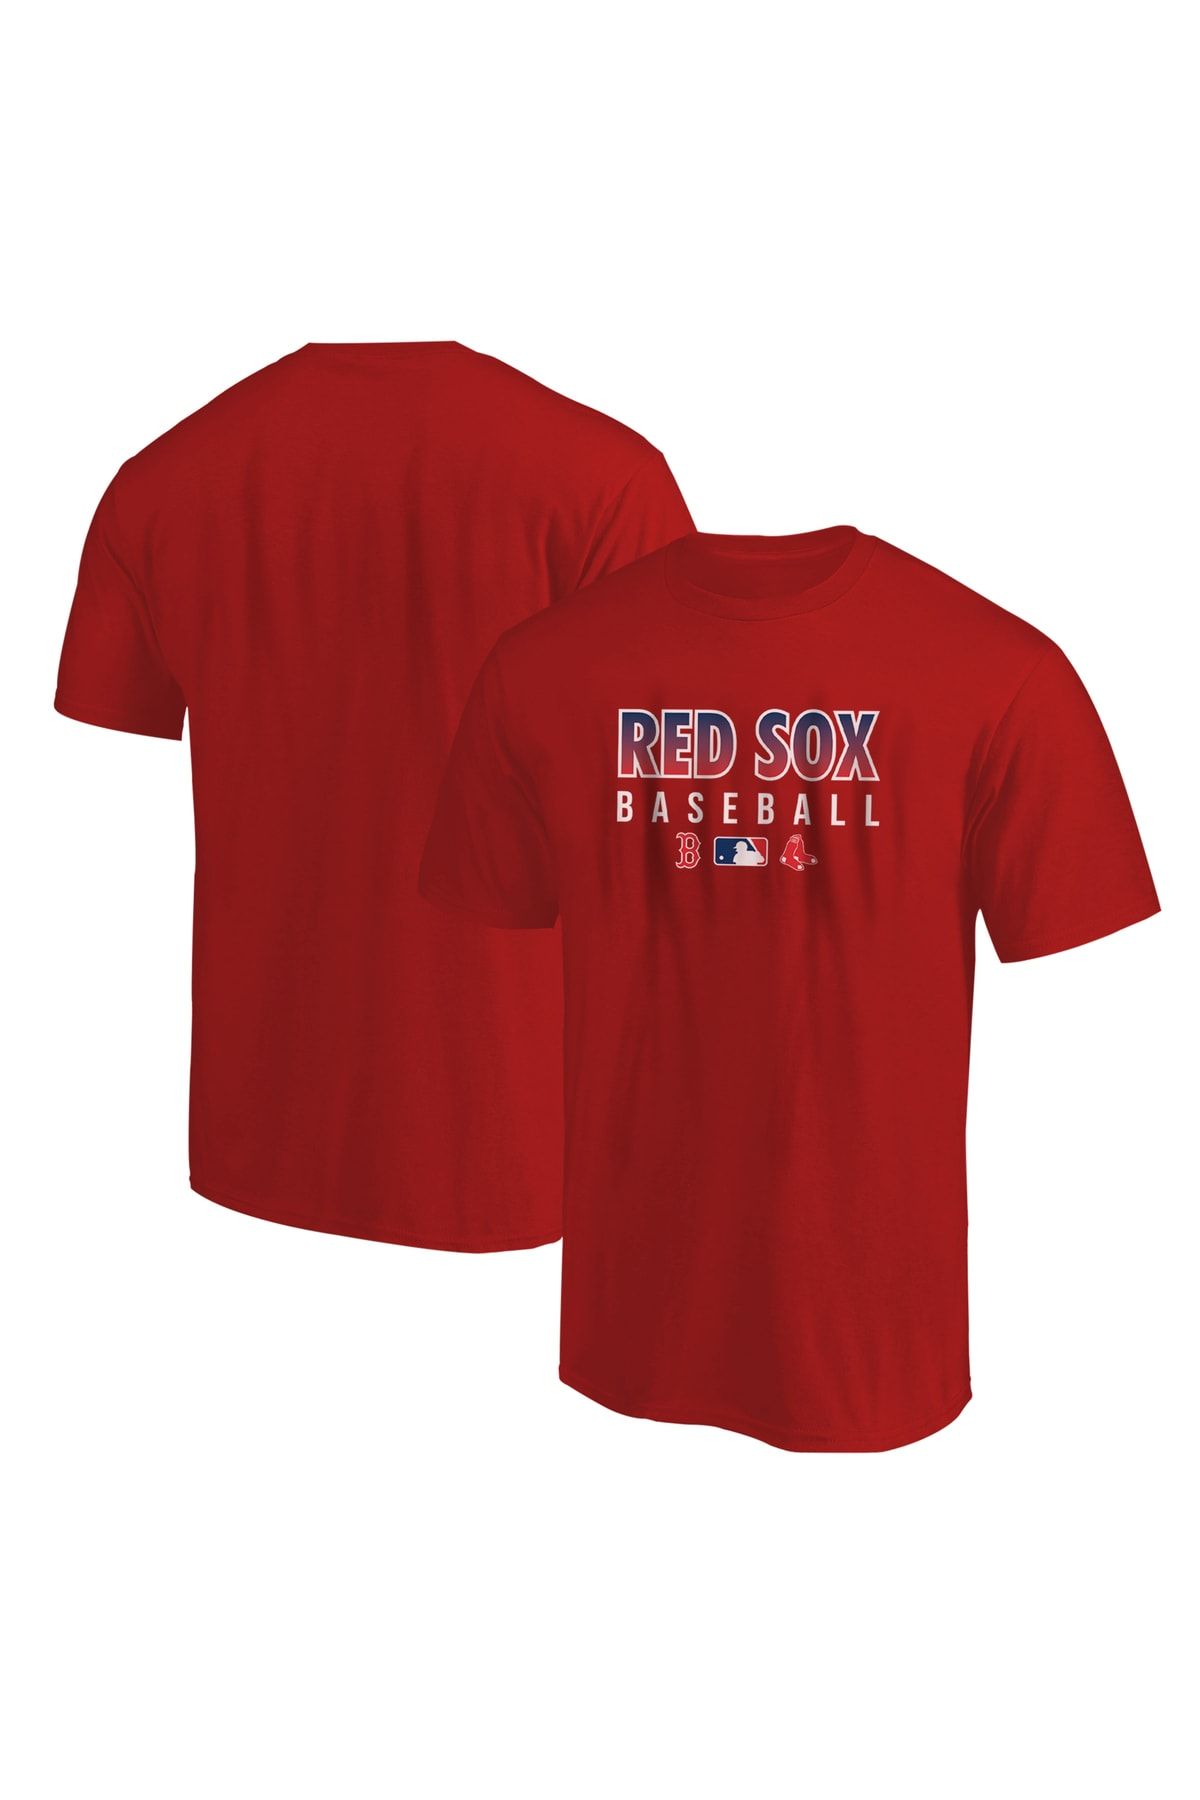 Usateamfans Red Sox Tshirt